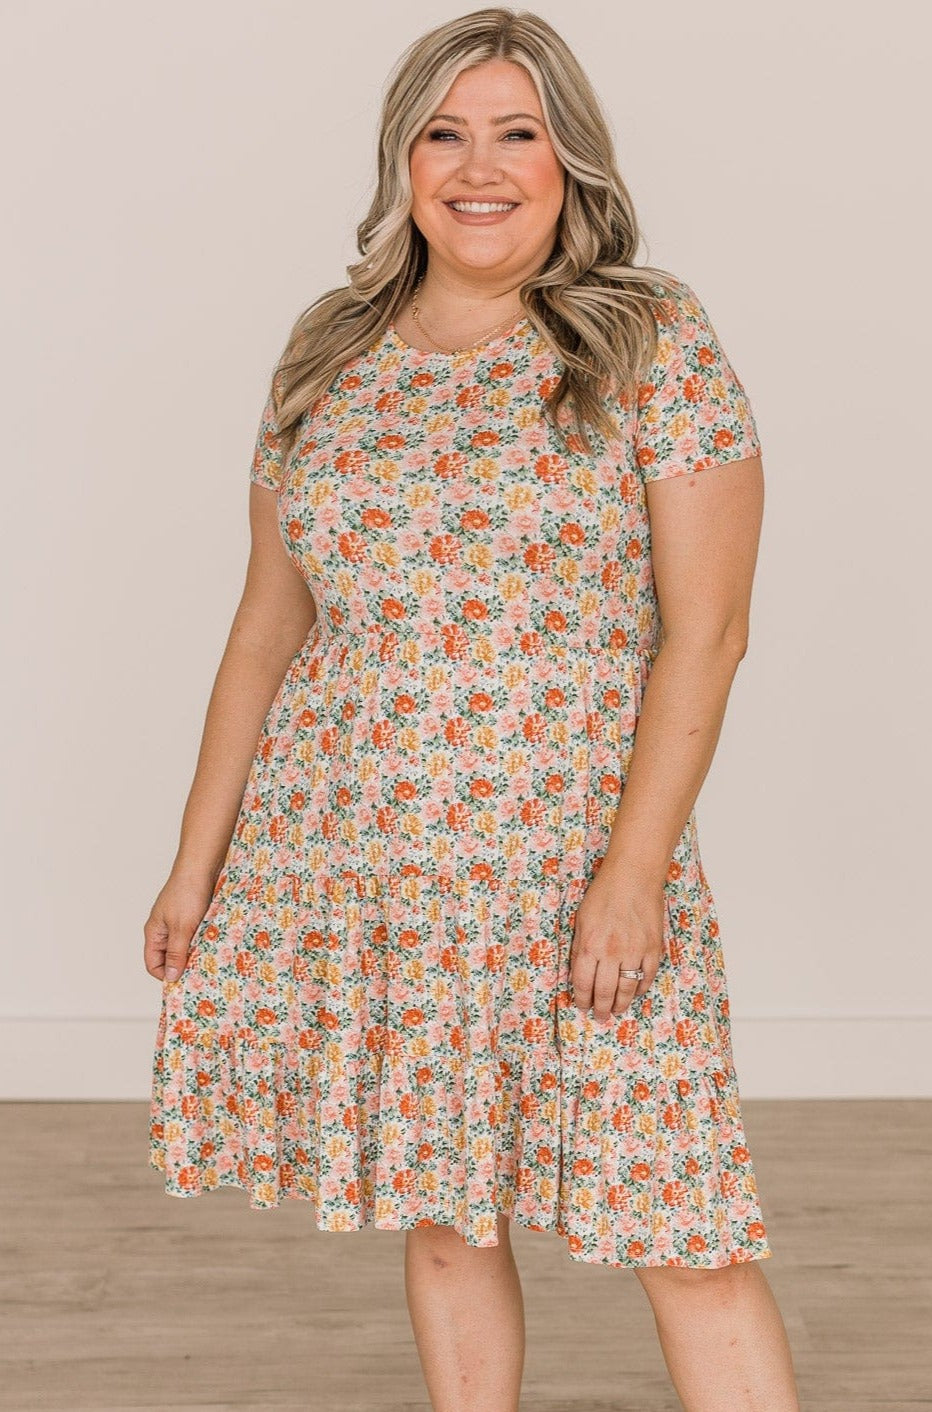 No Rainy Days Floral Tiered Dress- Ivory & Pink